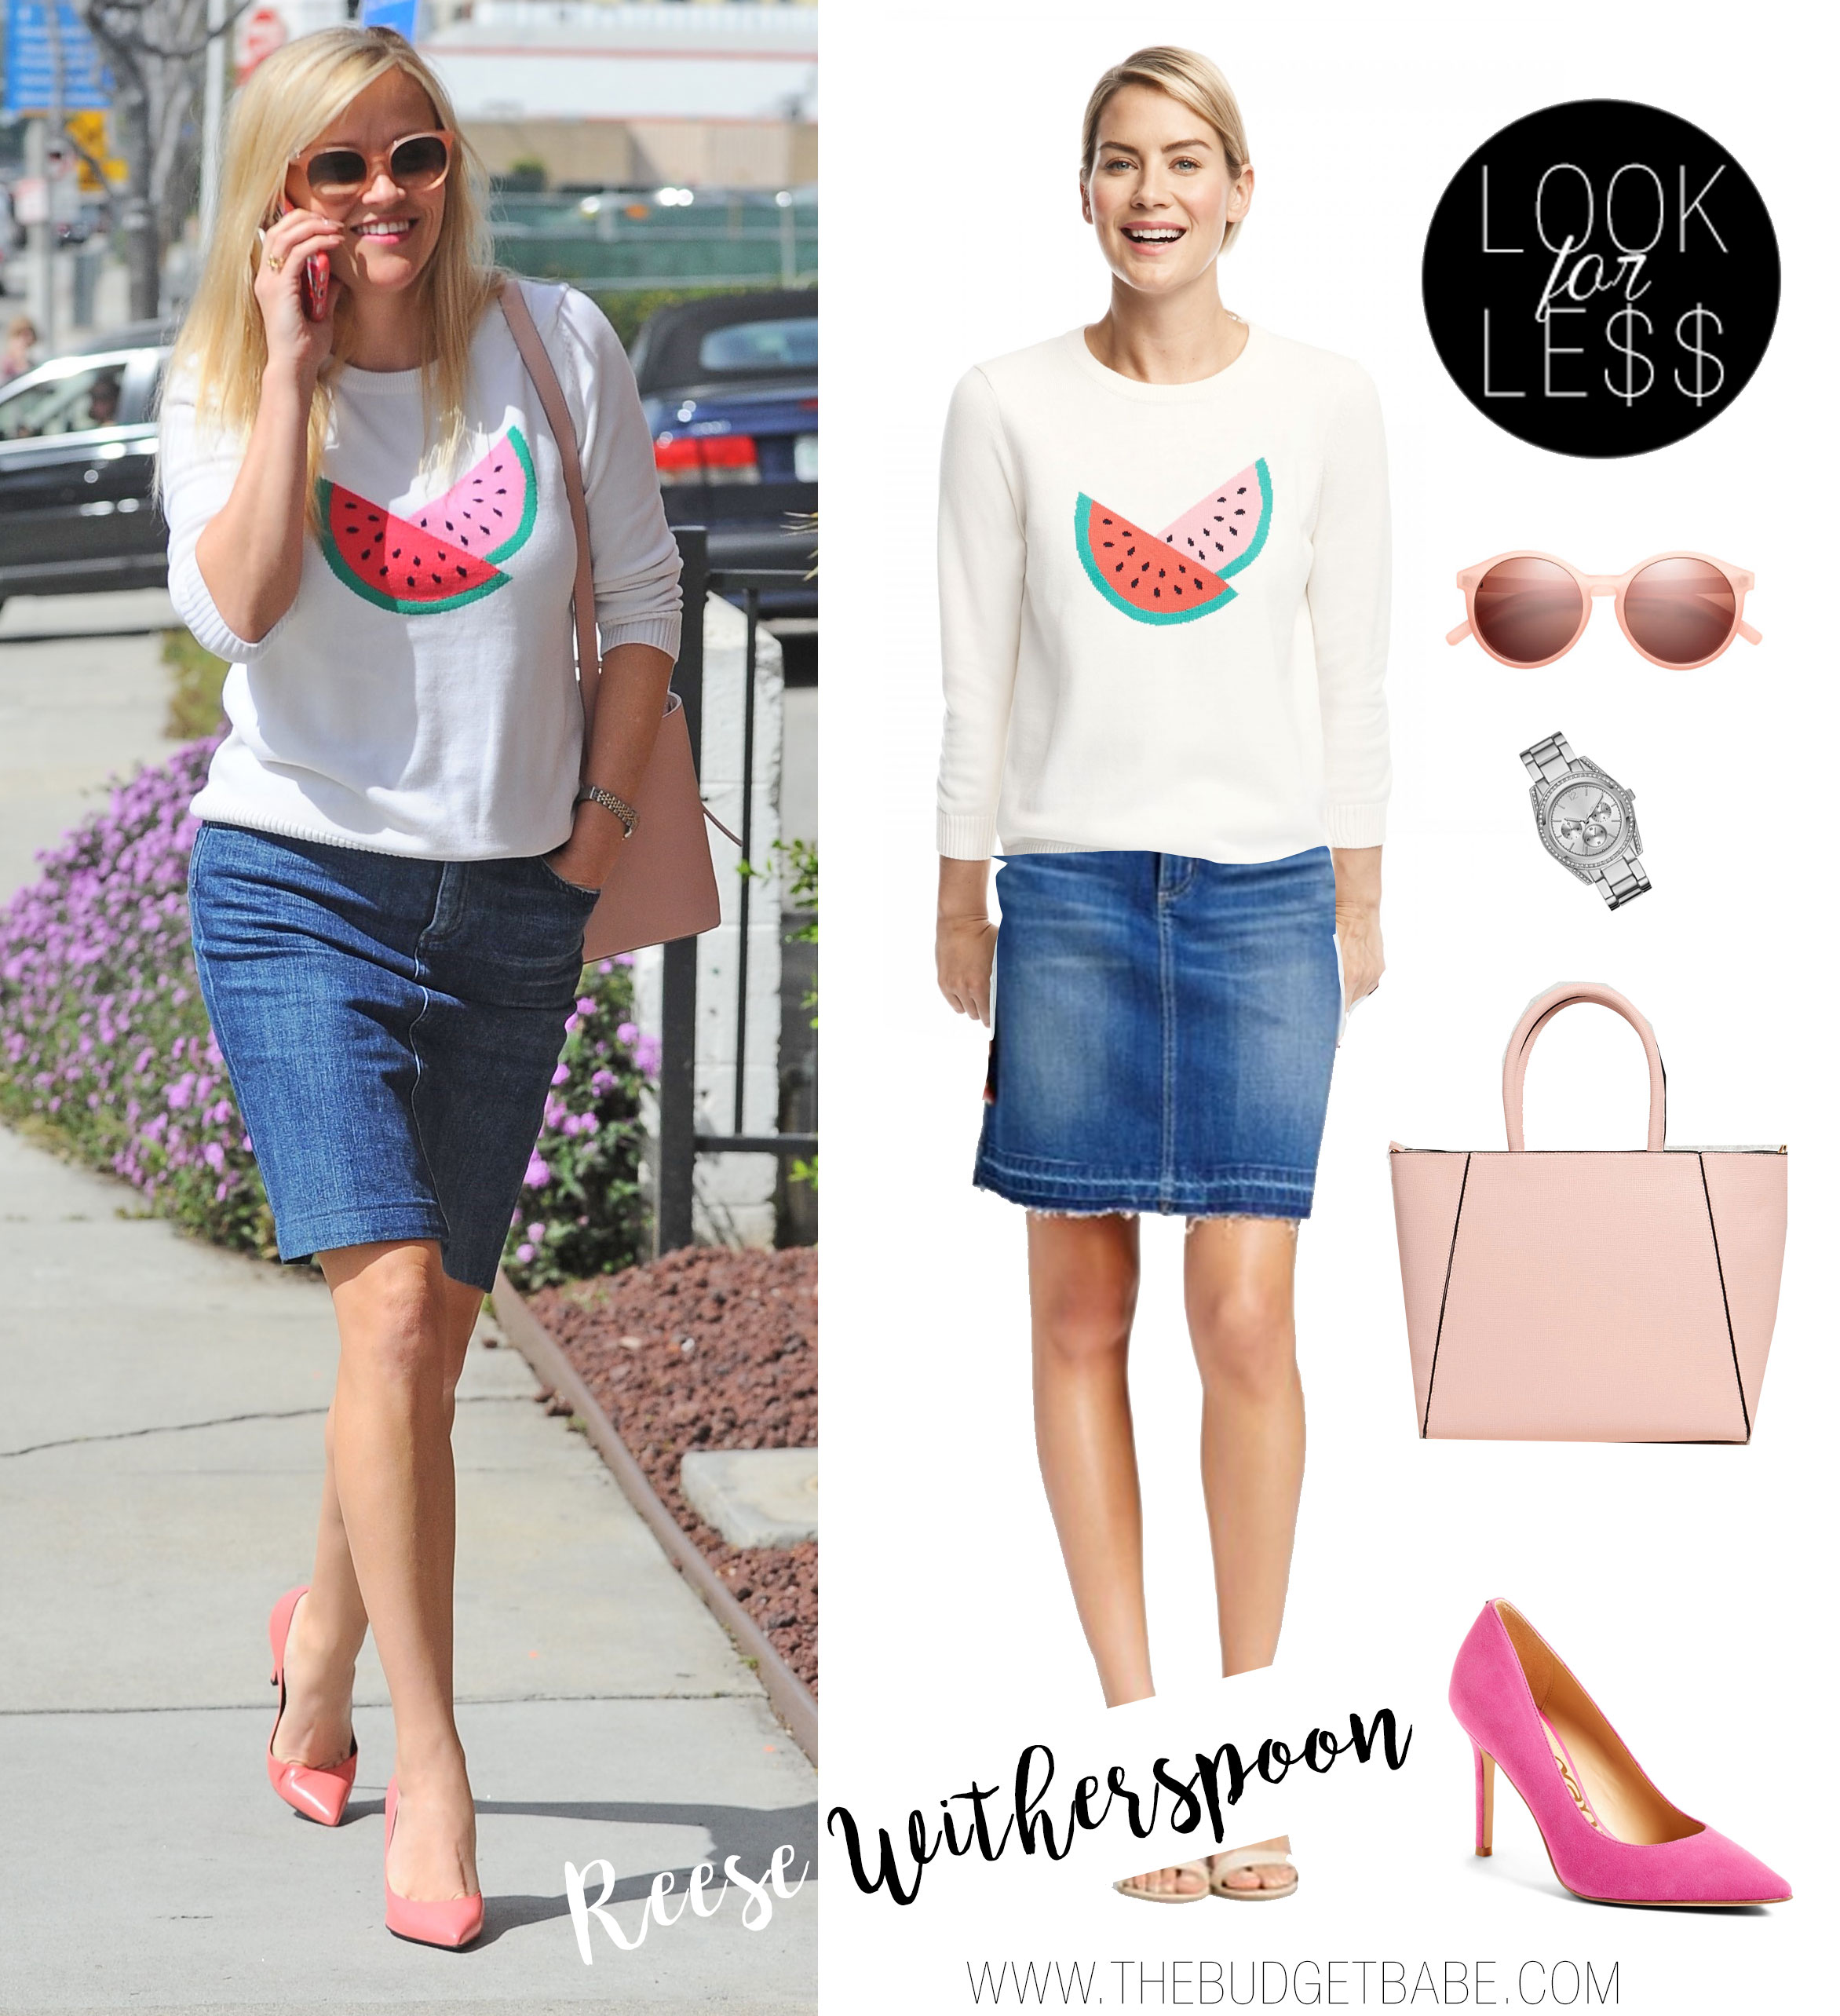 Reese Witherspoon wears a watermelon sweater with a denim skirt and pink accessories.